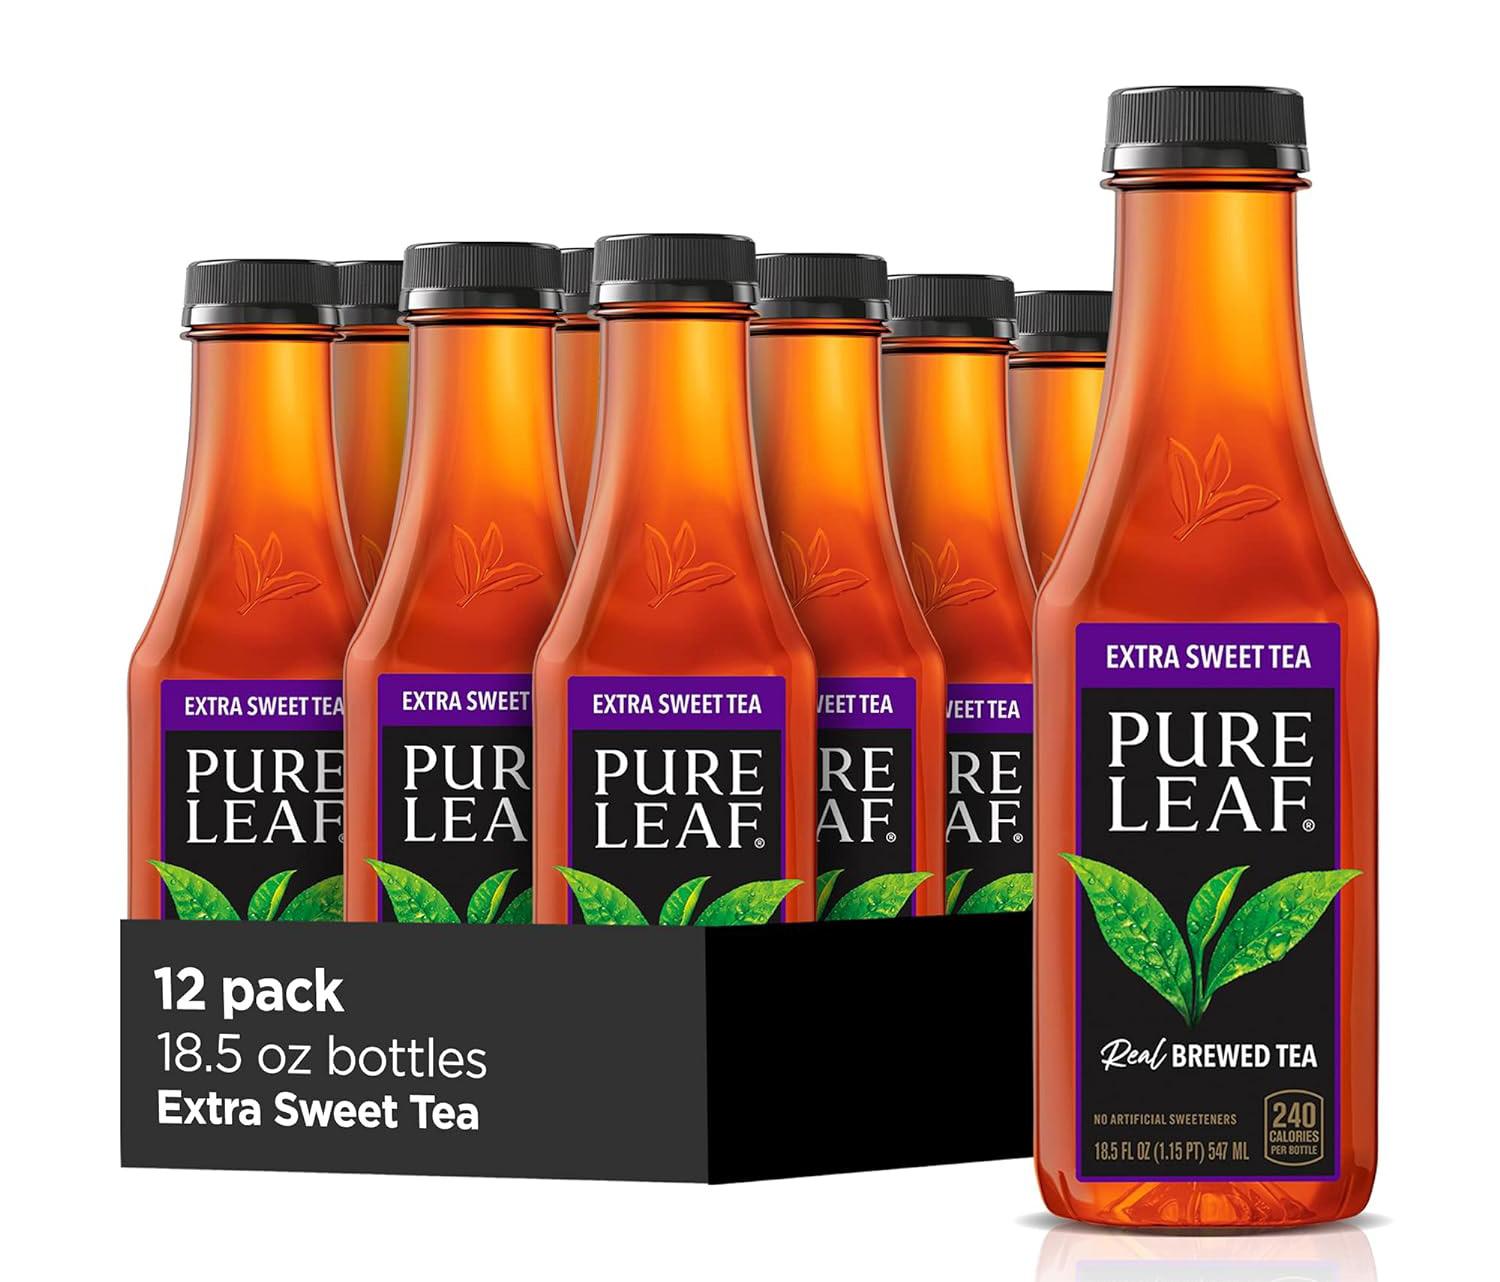 Pure Leaf Extra Sweet Iced Tea Bottles 12 Pack for $11.77